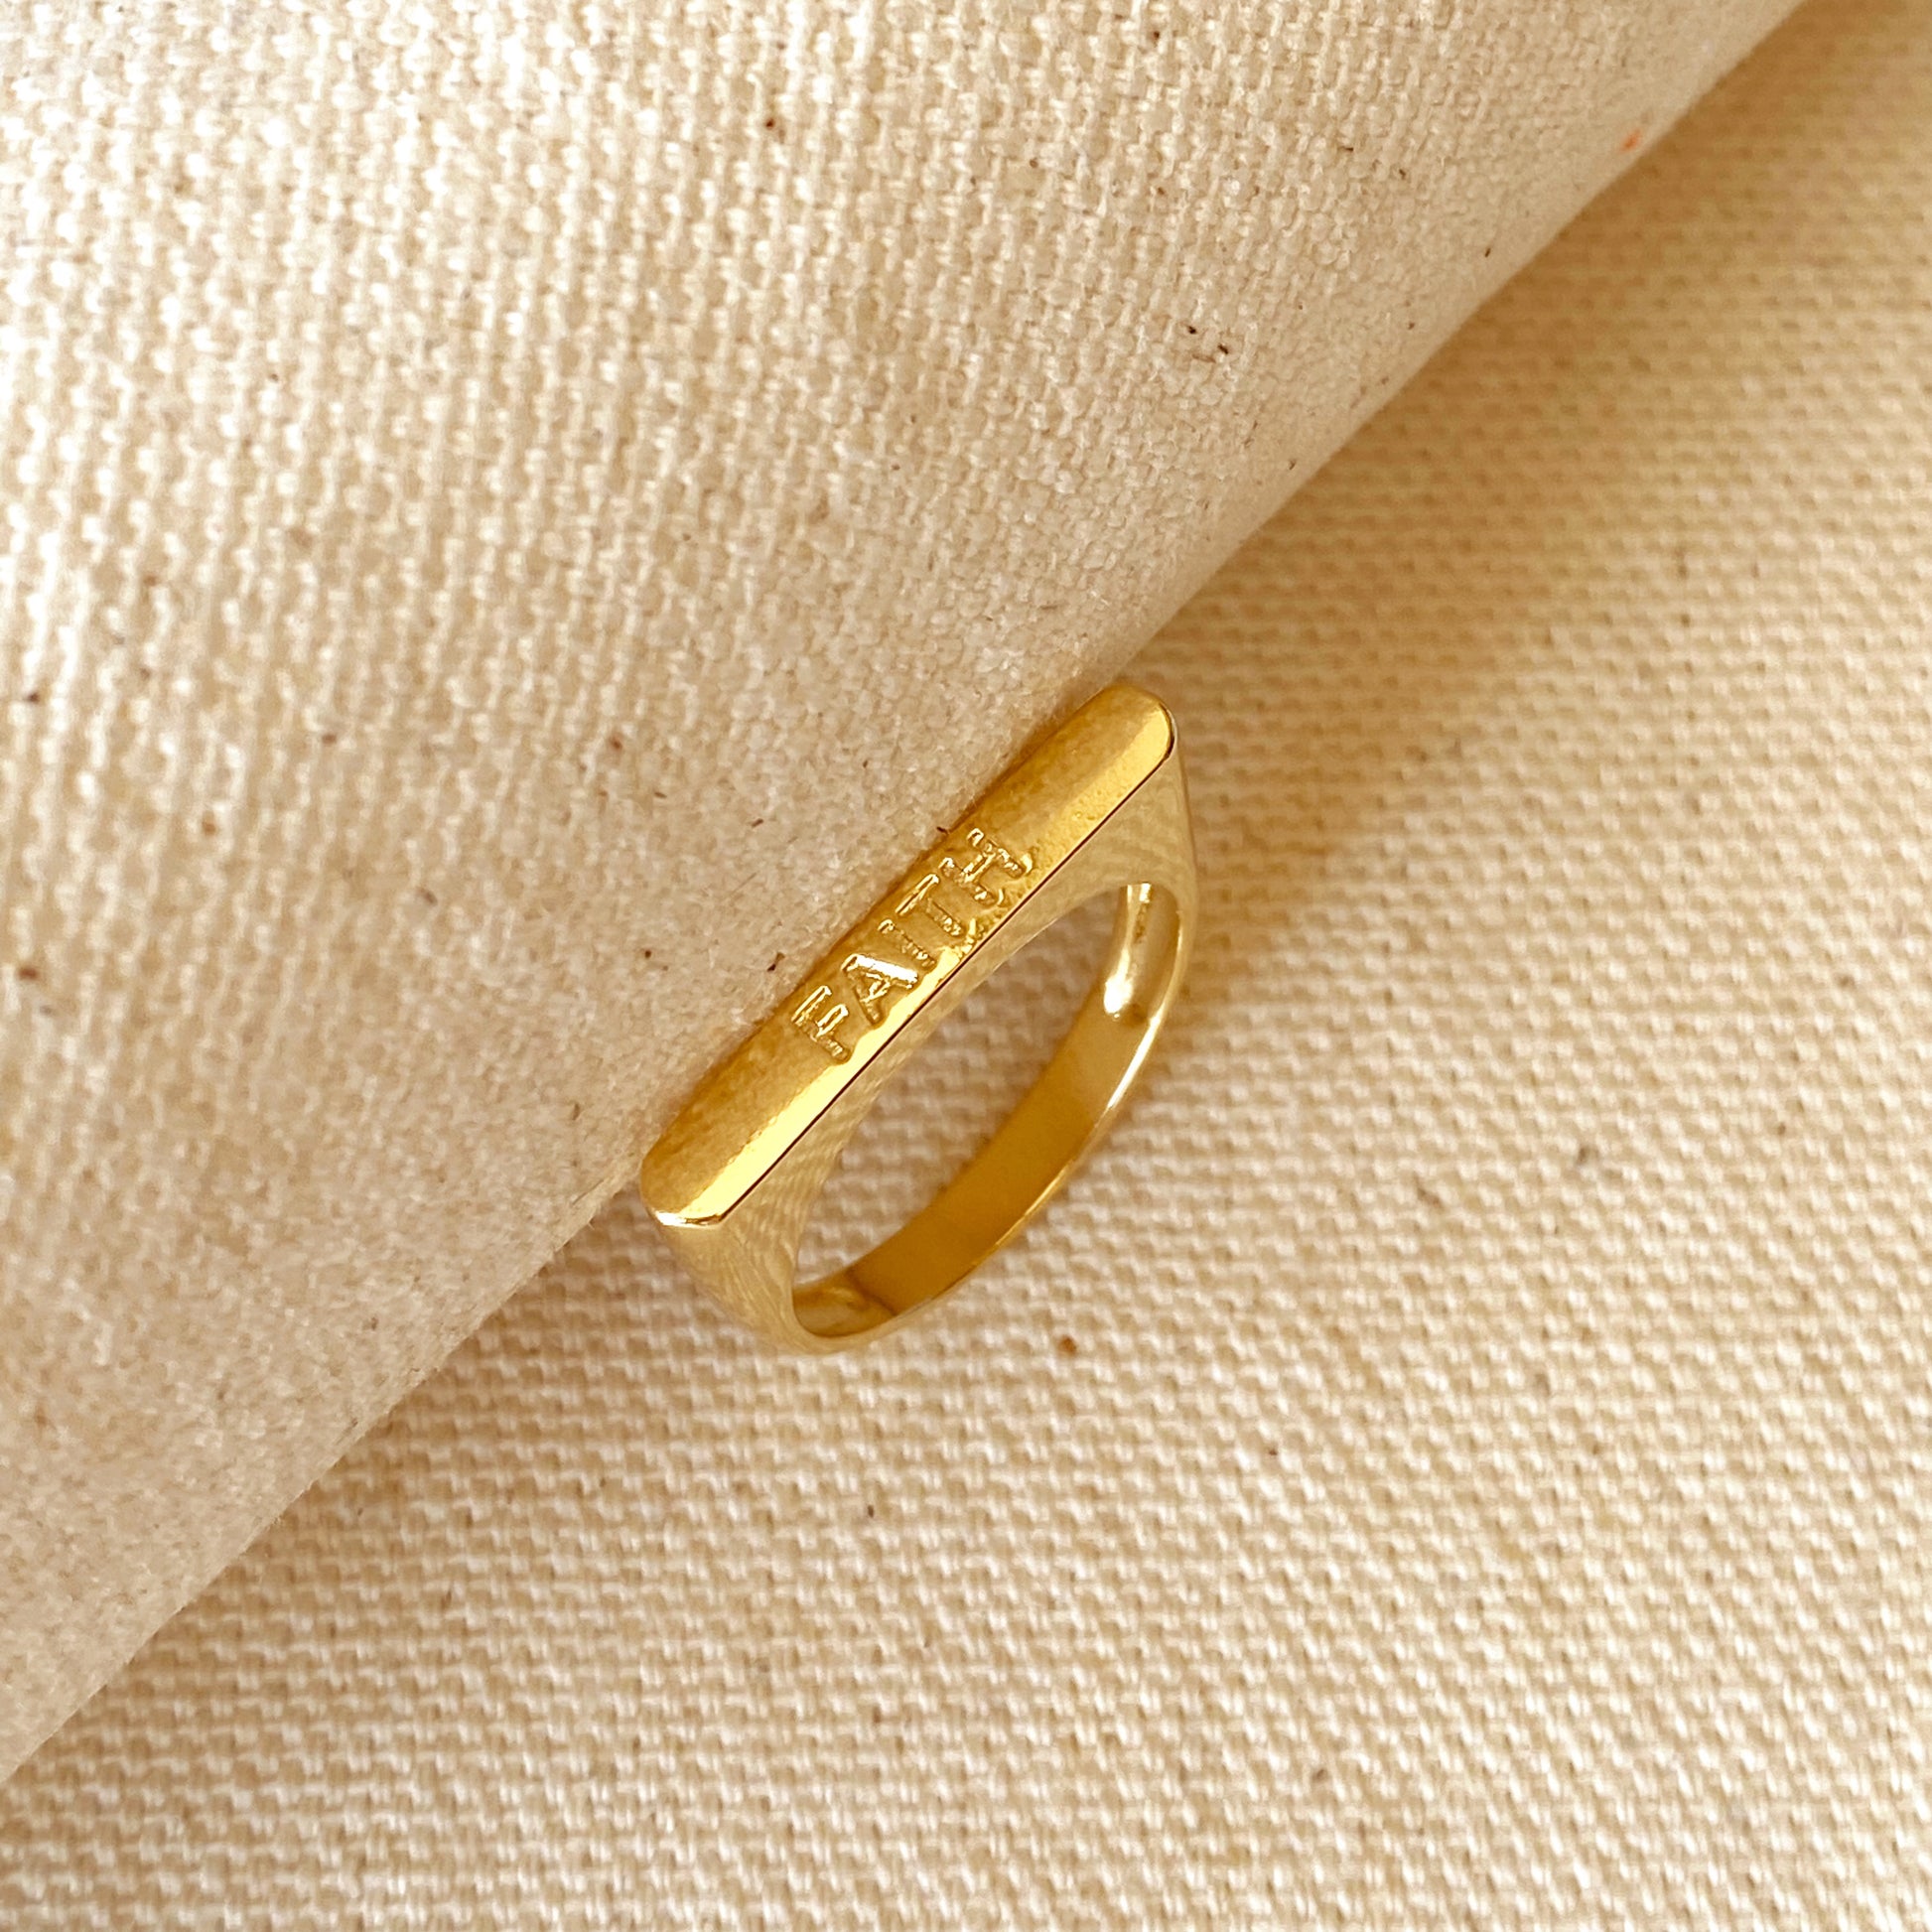 GoldFi 18k Gold Filled Faith Engraved Stackable Ring